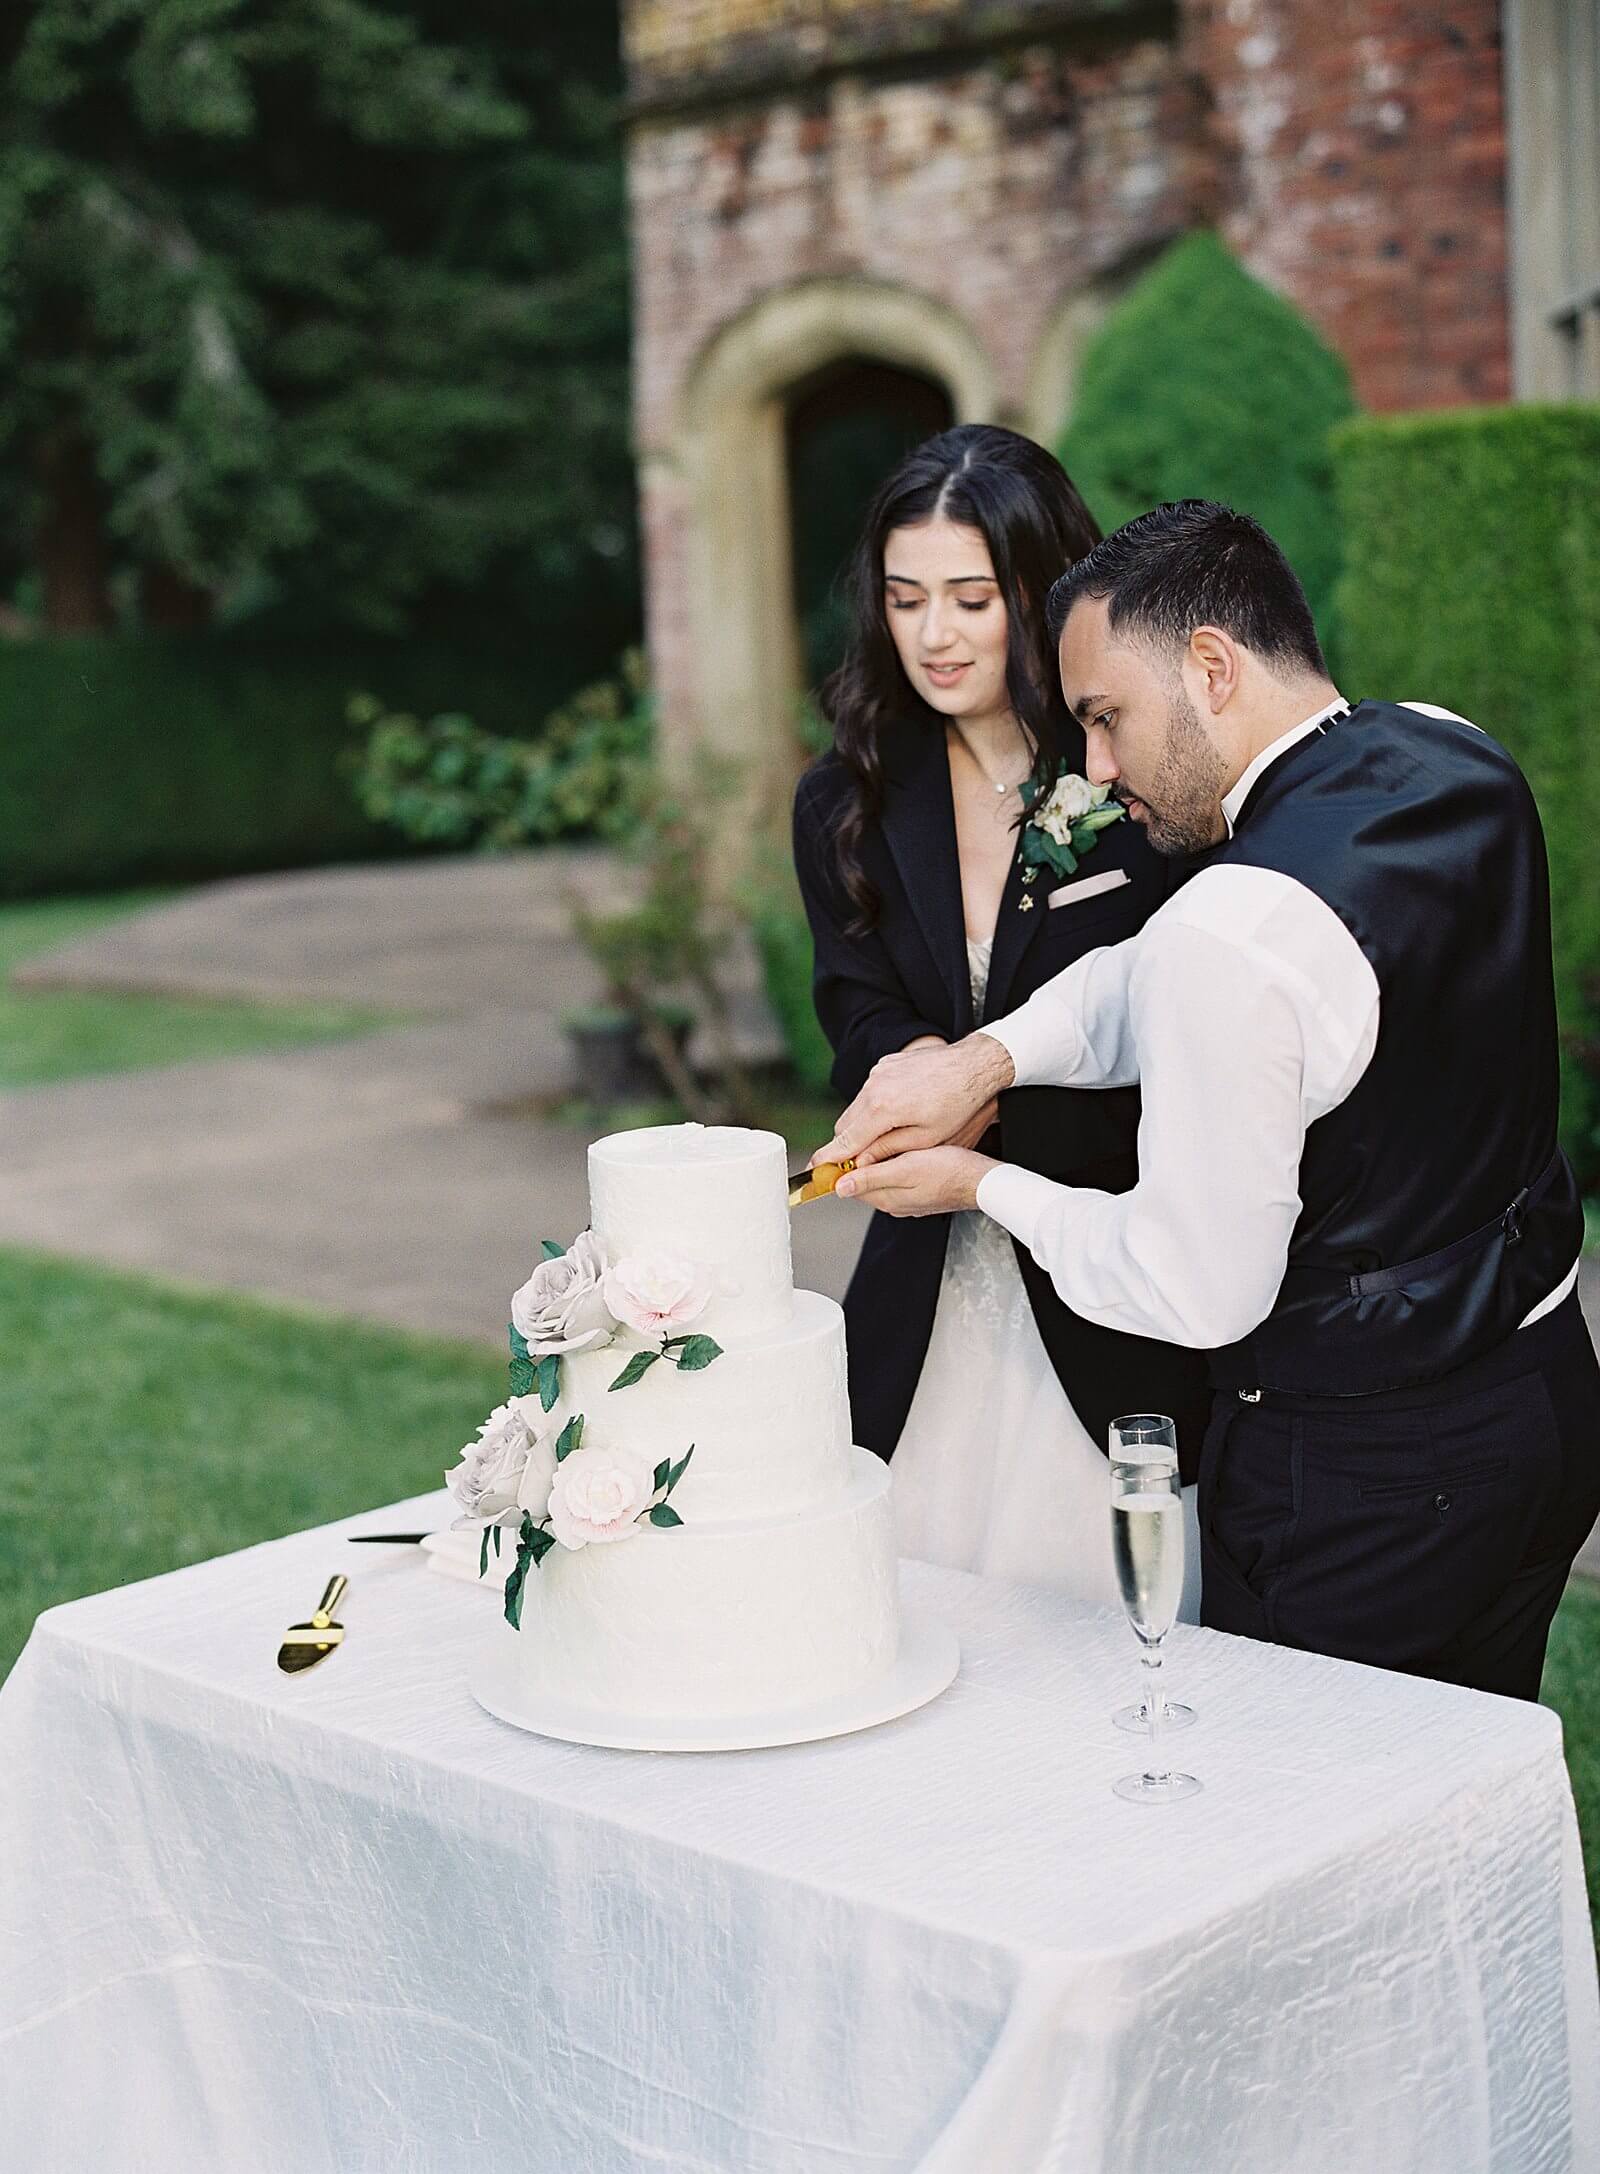 Bride and groom cut their wedding cake at Thornewood Castle -Jacqueline Benét Photography